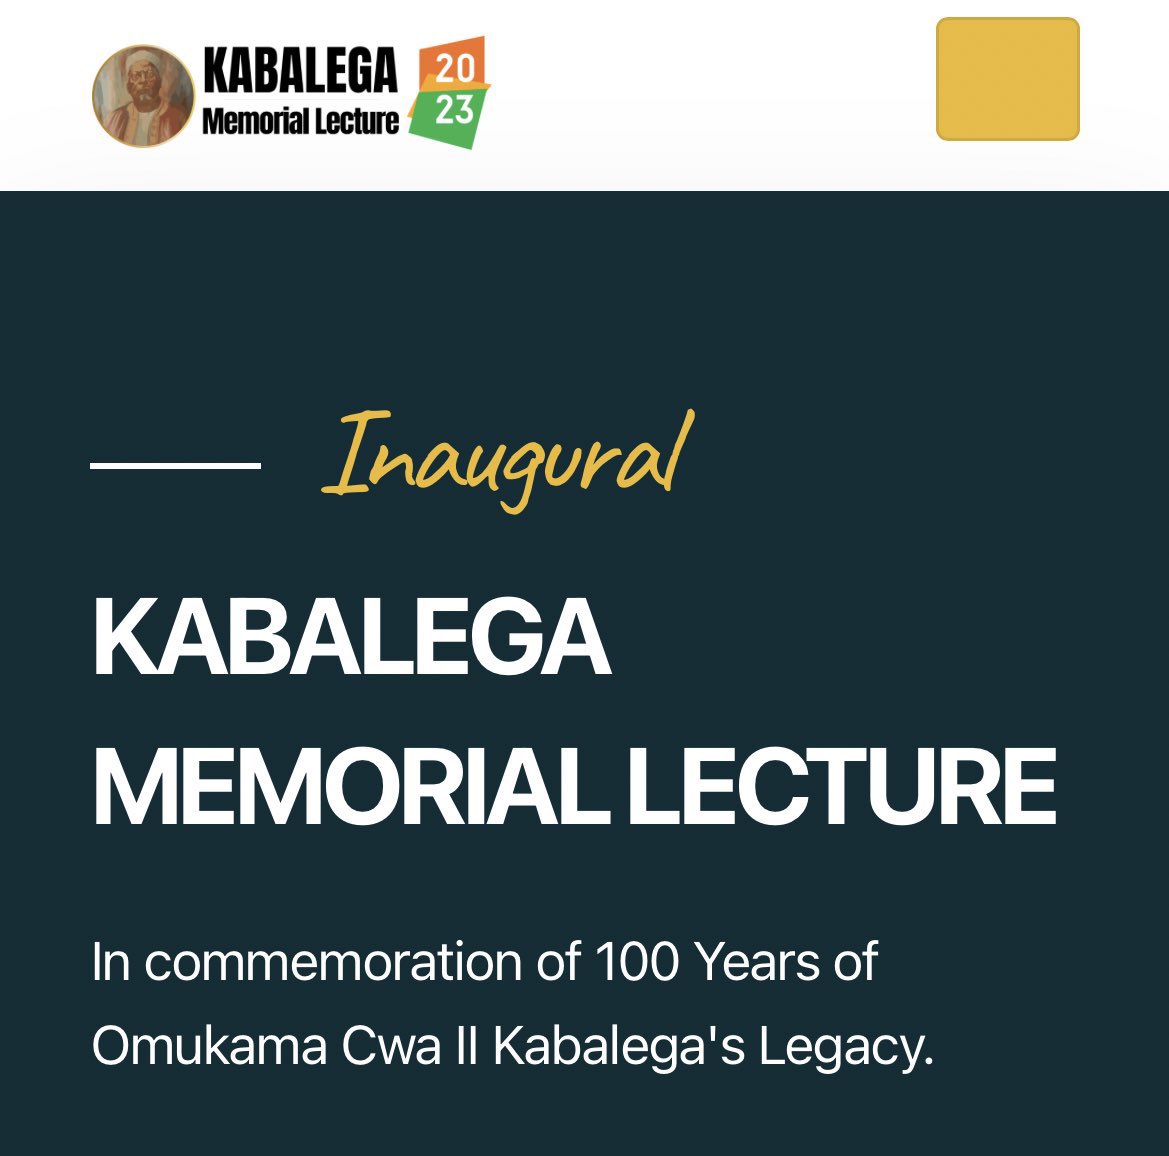 In commemoration of the 100 Years of Omukama Cwa II Kabalega’s Legacy there will be an Inaugural Kabalega memorial lecture at Serena Hotel ,Victoria Hall on the 18th of December.
Be There! 
#100YearsofKabalega 
#KabalegaMemorialLecture